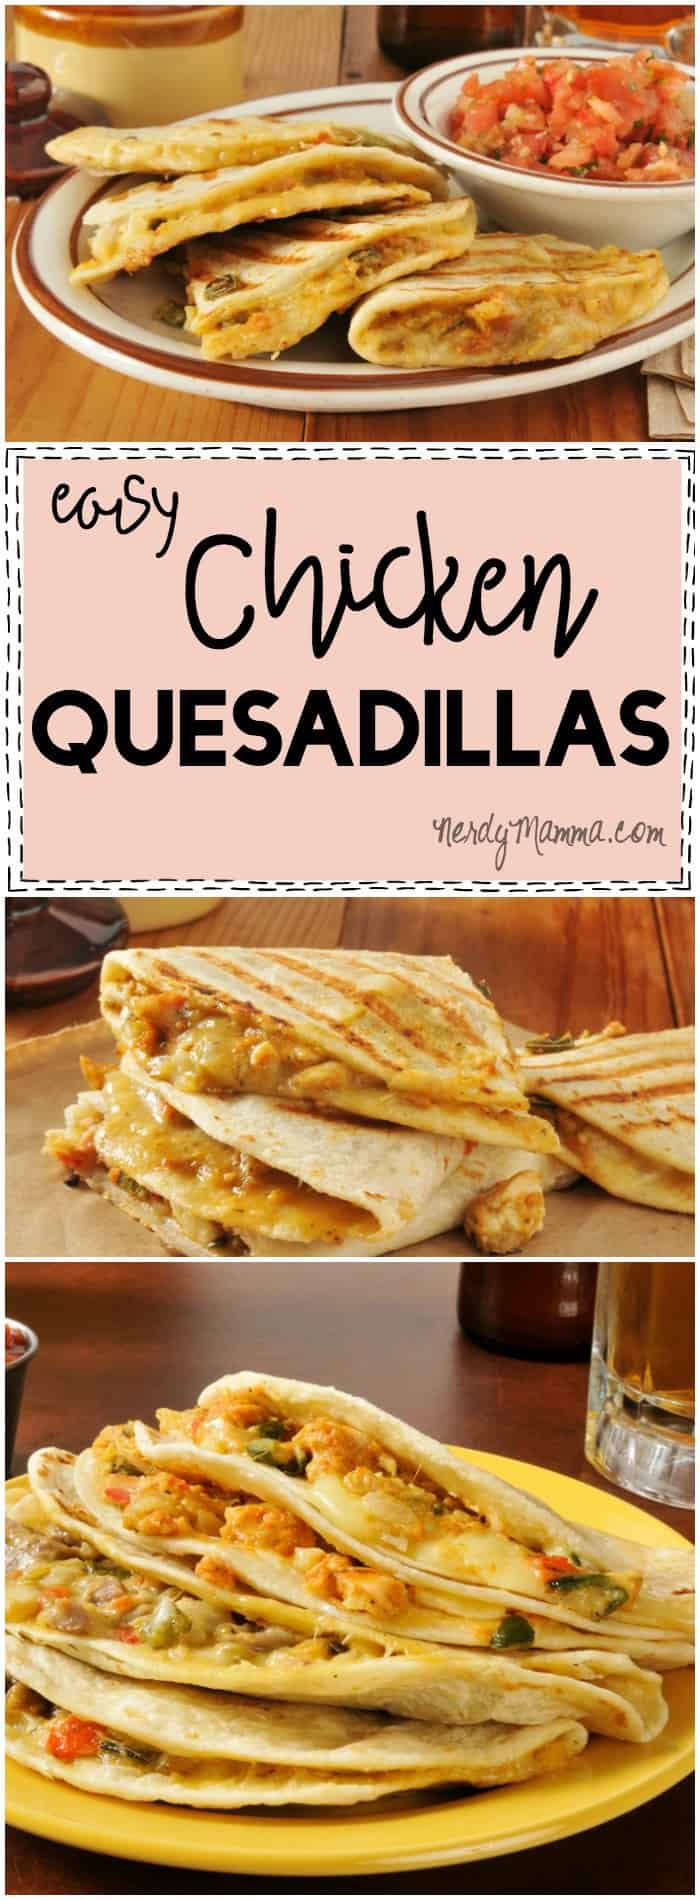 I LOVE this recipe for easy chicken quesadillas! So simple--and they sound so awesome.